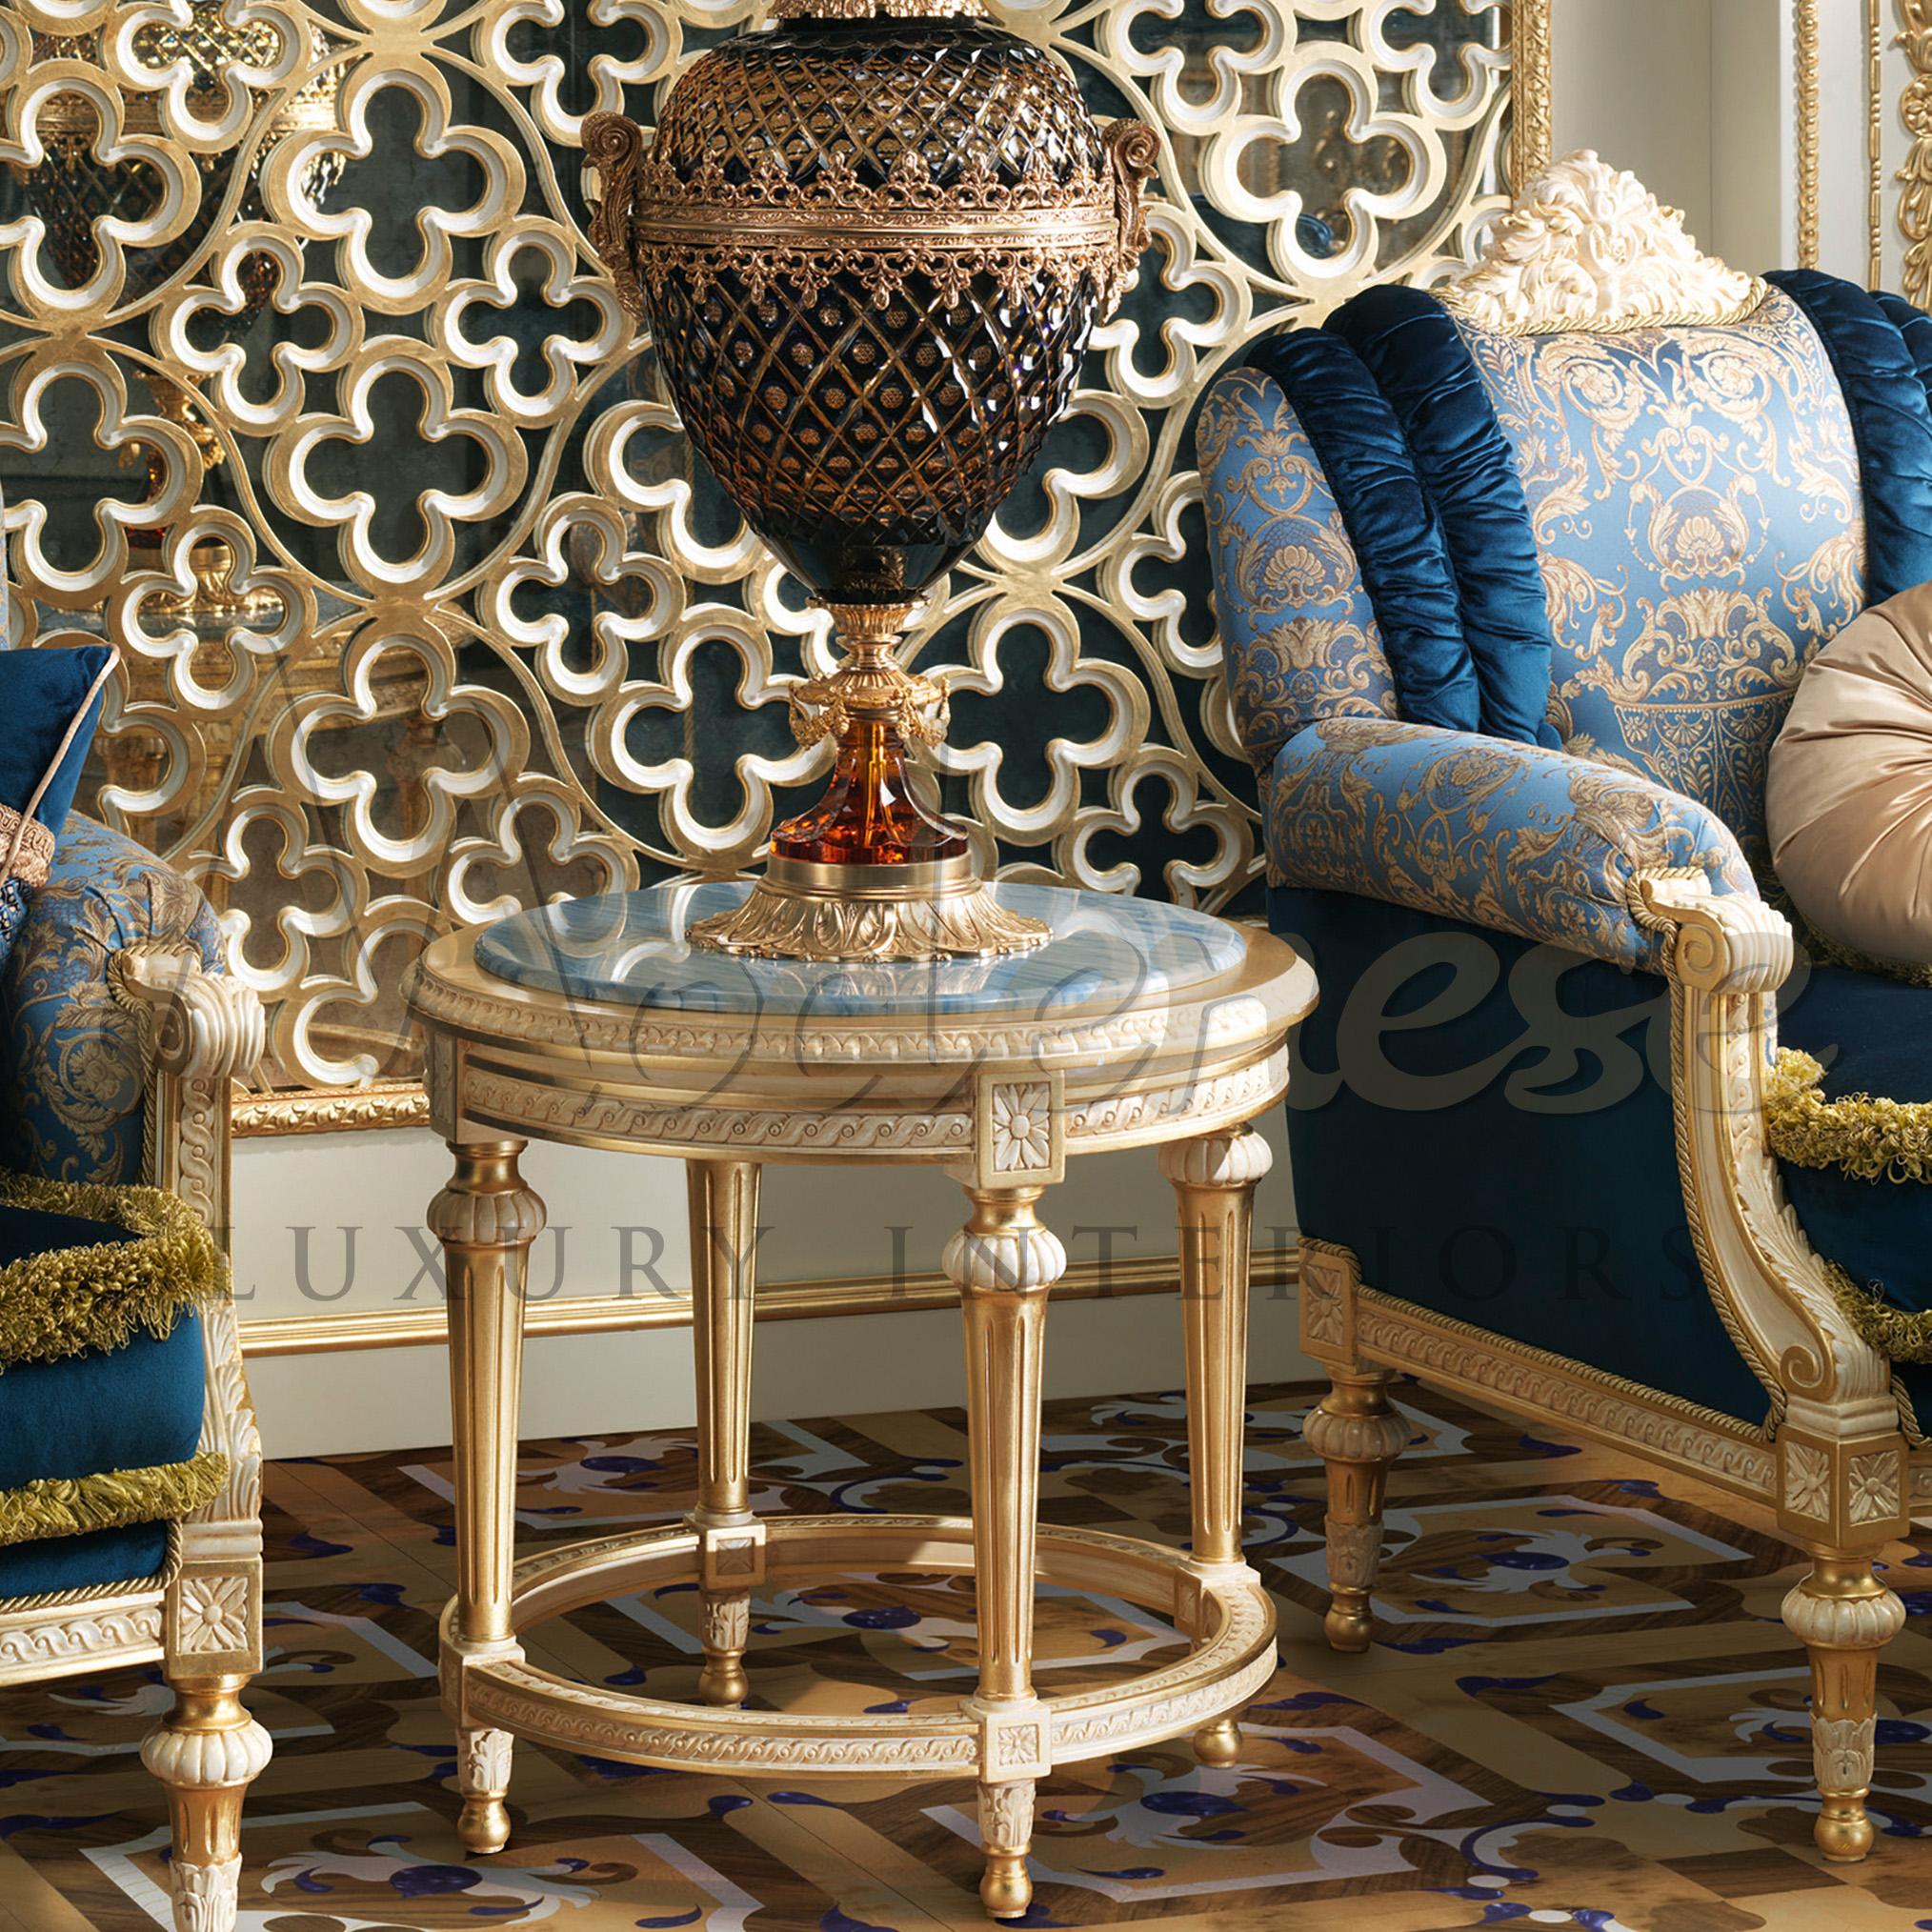 Modenese artisans kwoledge of gold leaf applications goes beyond imagination. The true essence of their work is shown through this magnificent round side table, that catches the eye with its tasteful combination of azul marble and shining gold leaf